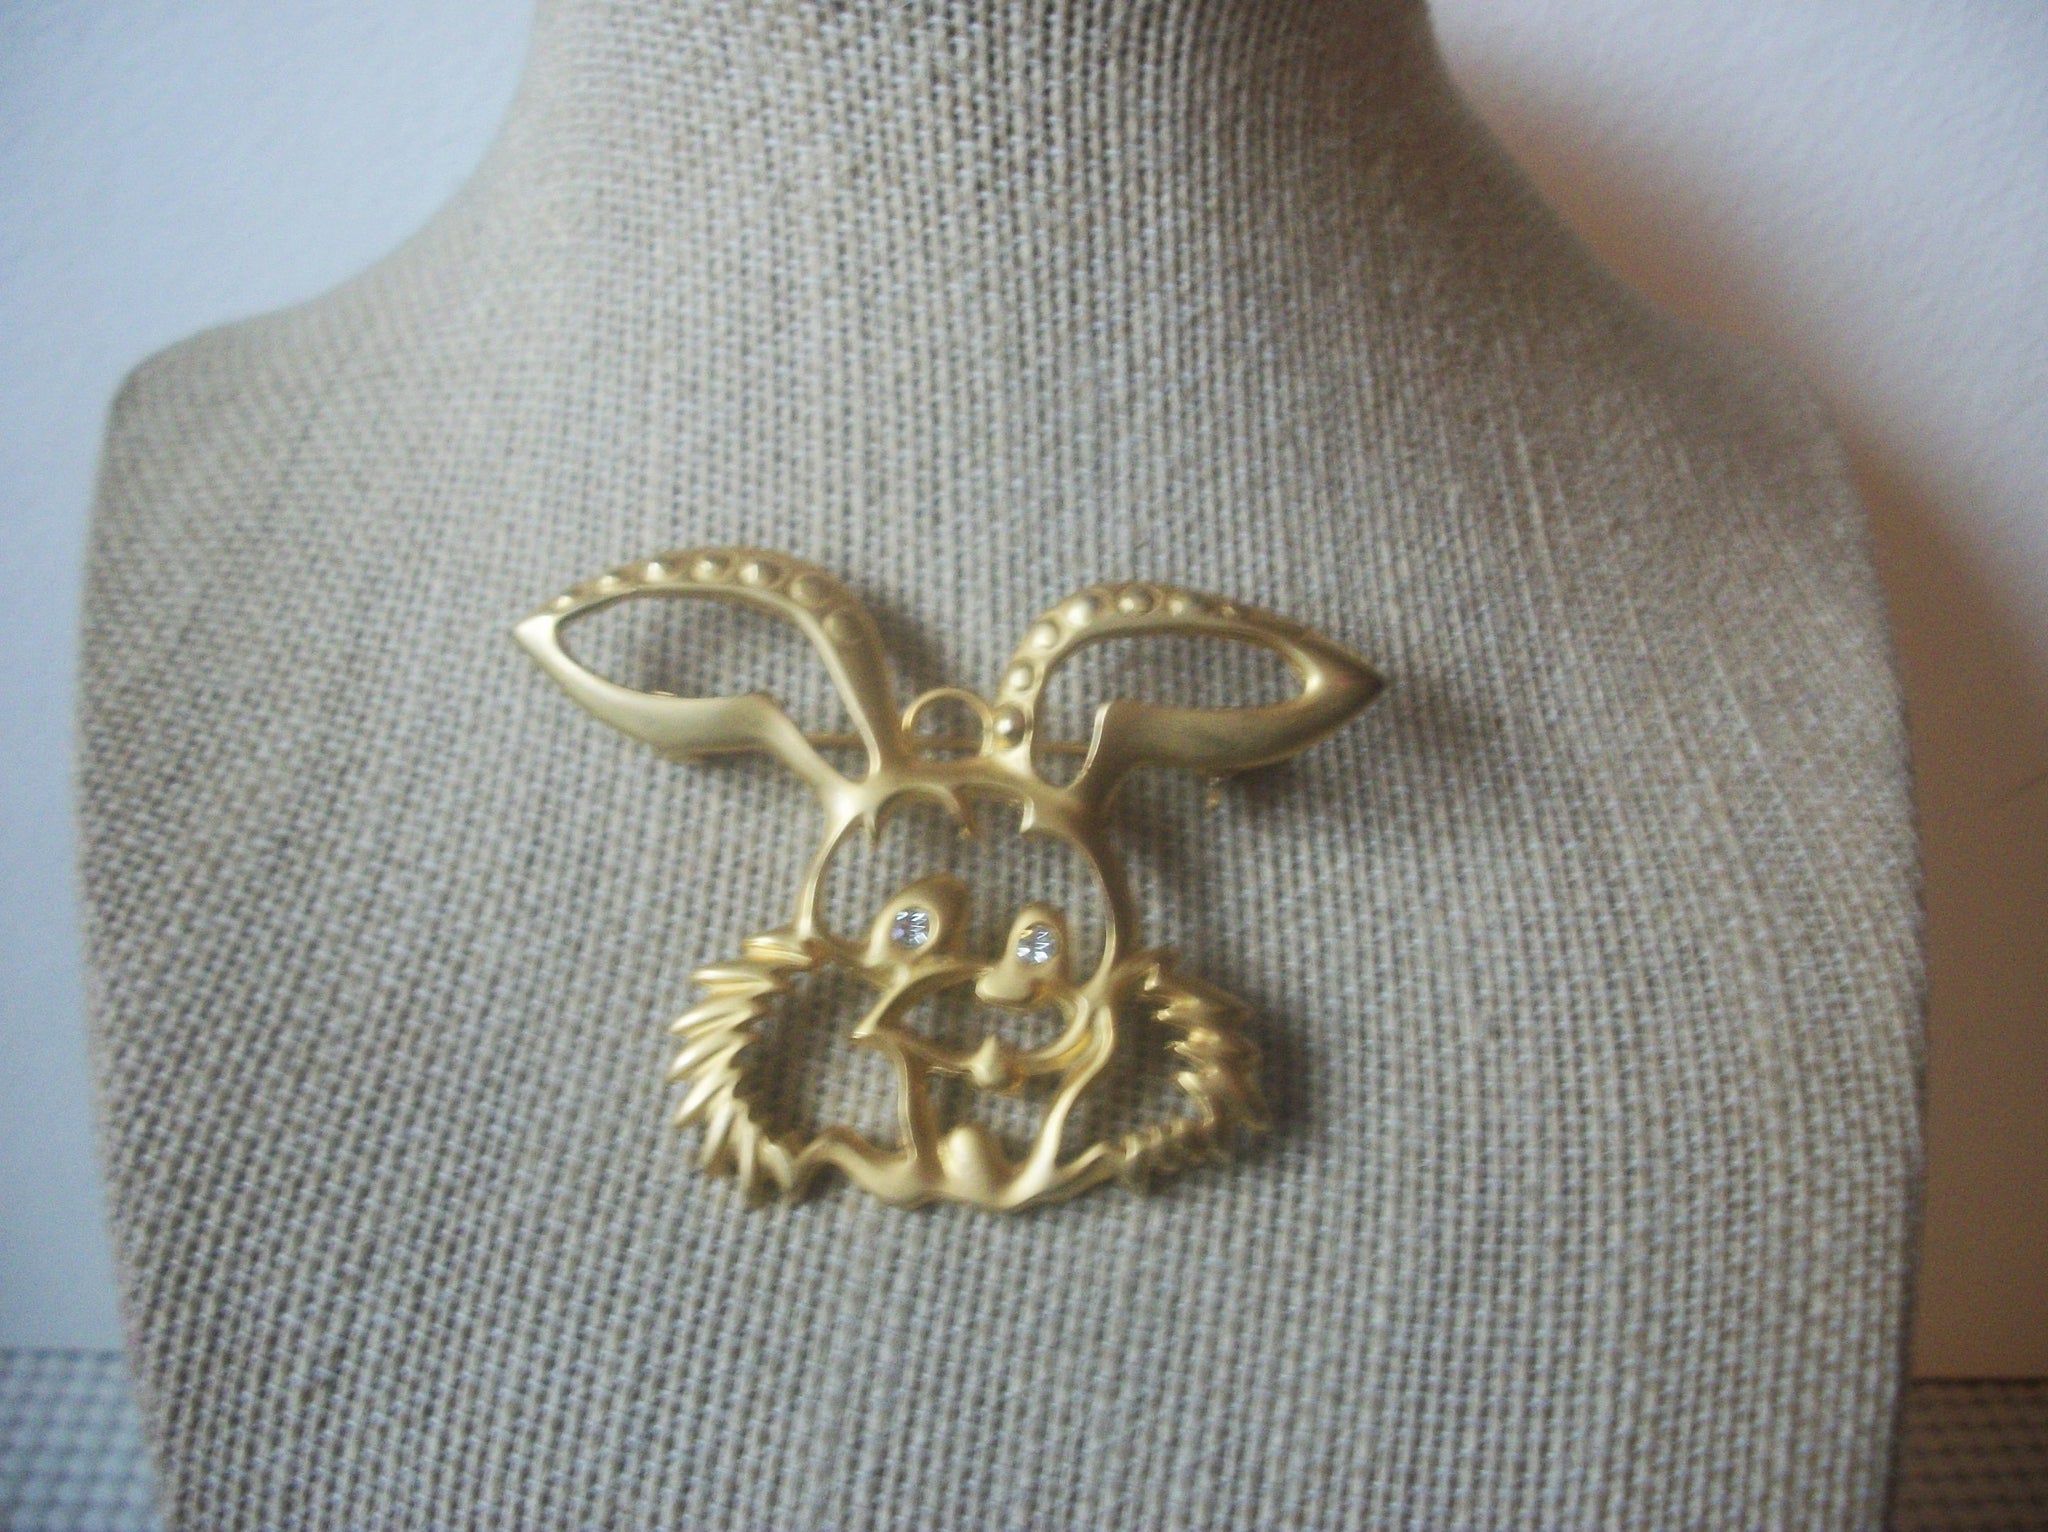 Vintage Jewelry Cute Easter Bunny, Matte Gold Tone Clear Crystal Rhinestone Eyes, Brooch Pin 022521